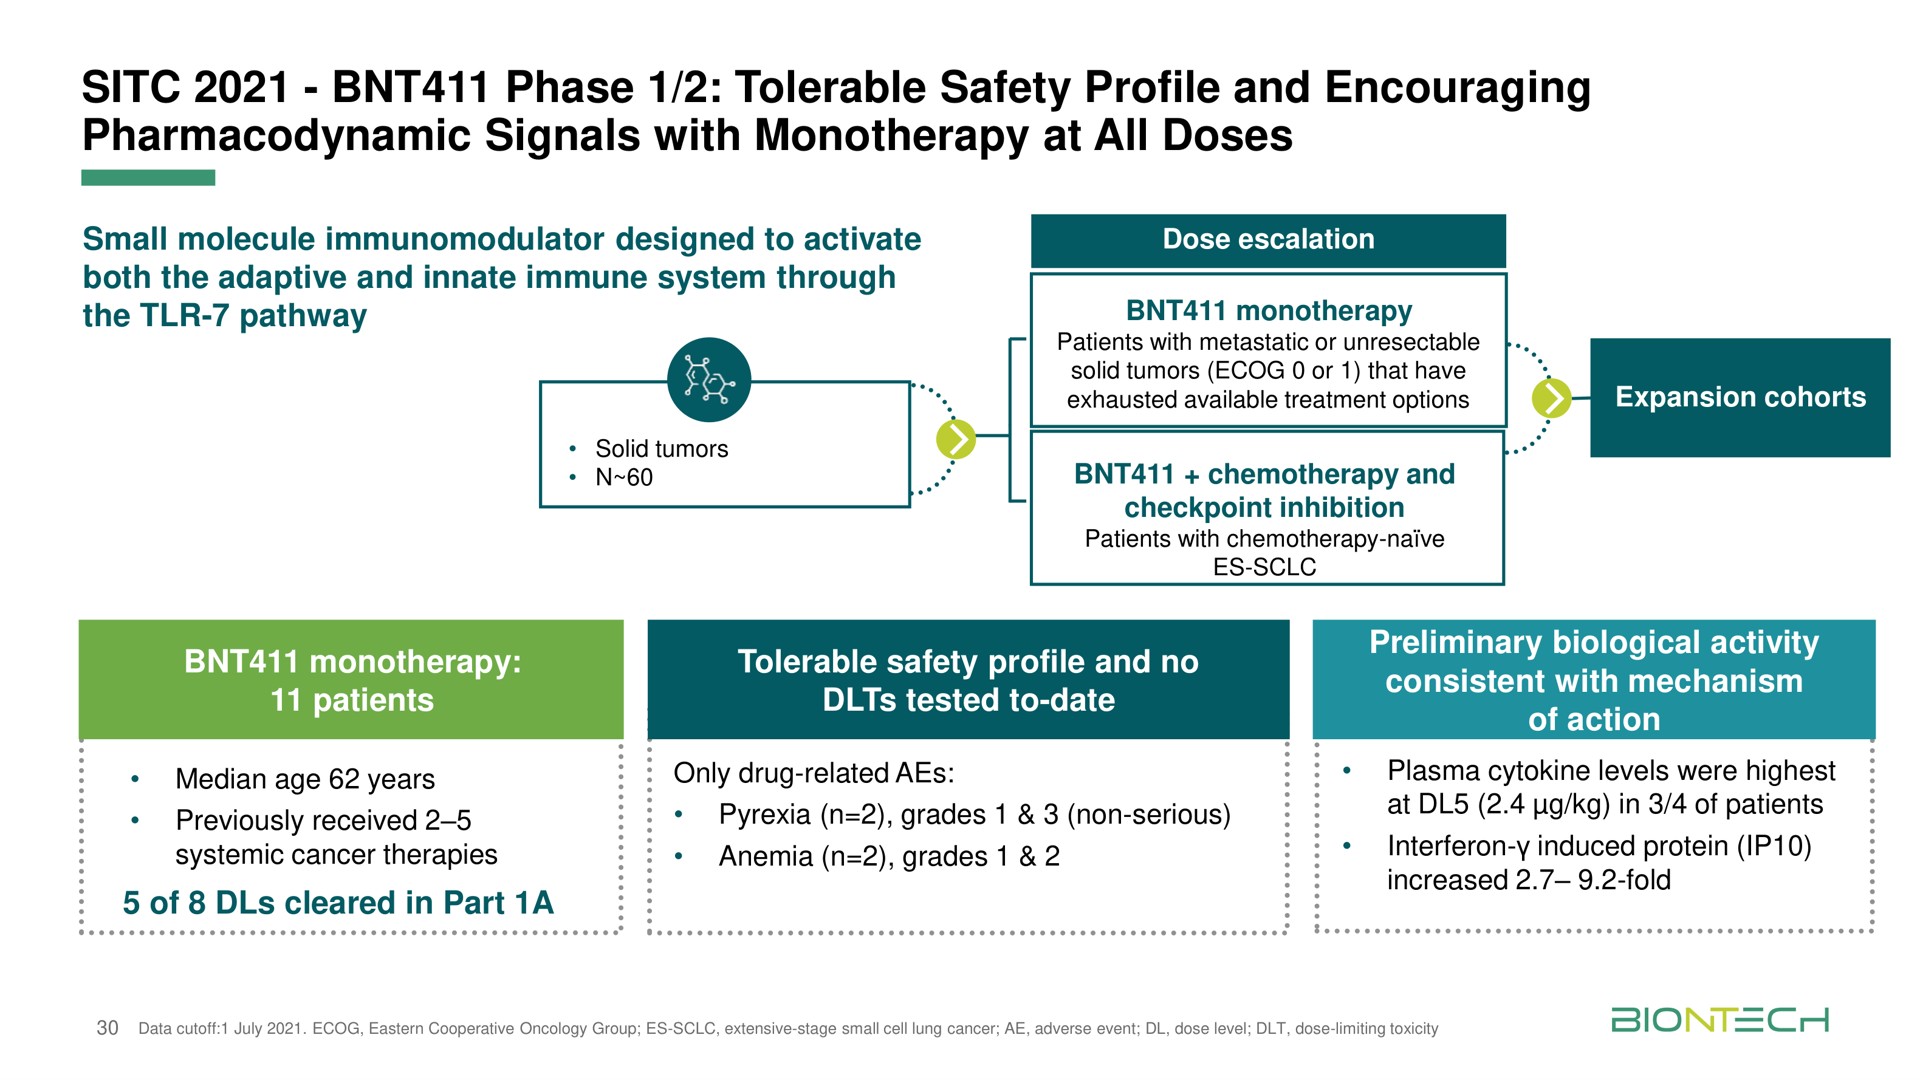 phase tolerable safety profile and encouraging pharmacodynamic signals with at all doses previously received i pyrexia grades non serious in of patients | BioNTech